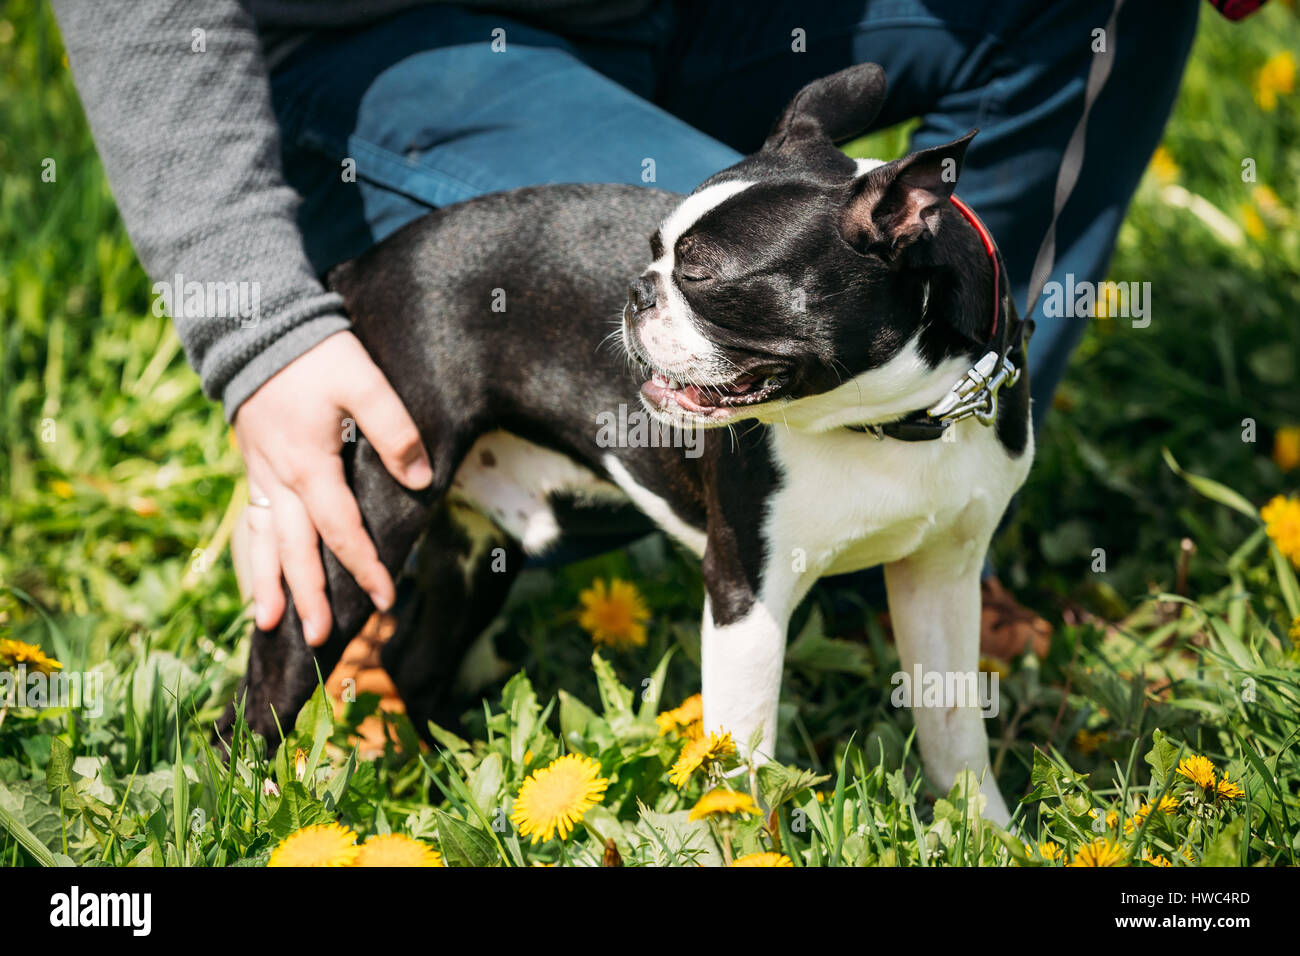 Funny Young Boston Bull Terrier Dog Play Outdoor In Green Spring Meadow With Yellow Flowers. Playful Pet Outdoors. Stock Photo